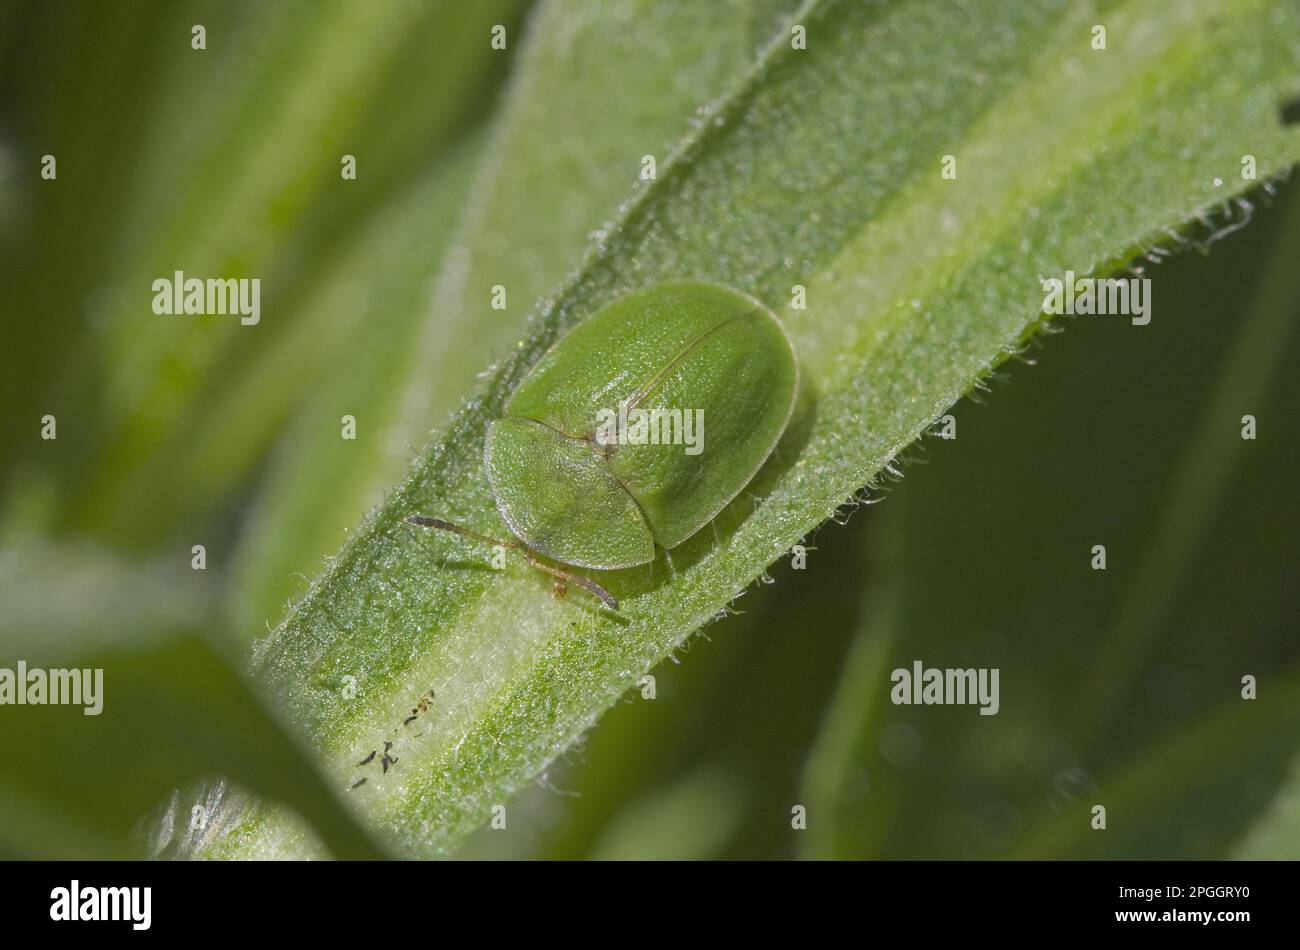 Thistle tortoise beetle (Cassida leaf beetle (Chrysomelidae), Other animals, Insects, Beetles, Animals, Thistle Tortoise Beetle adult, resting on Stock Photo